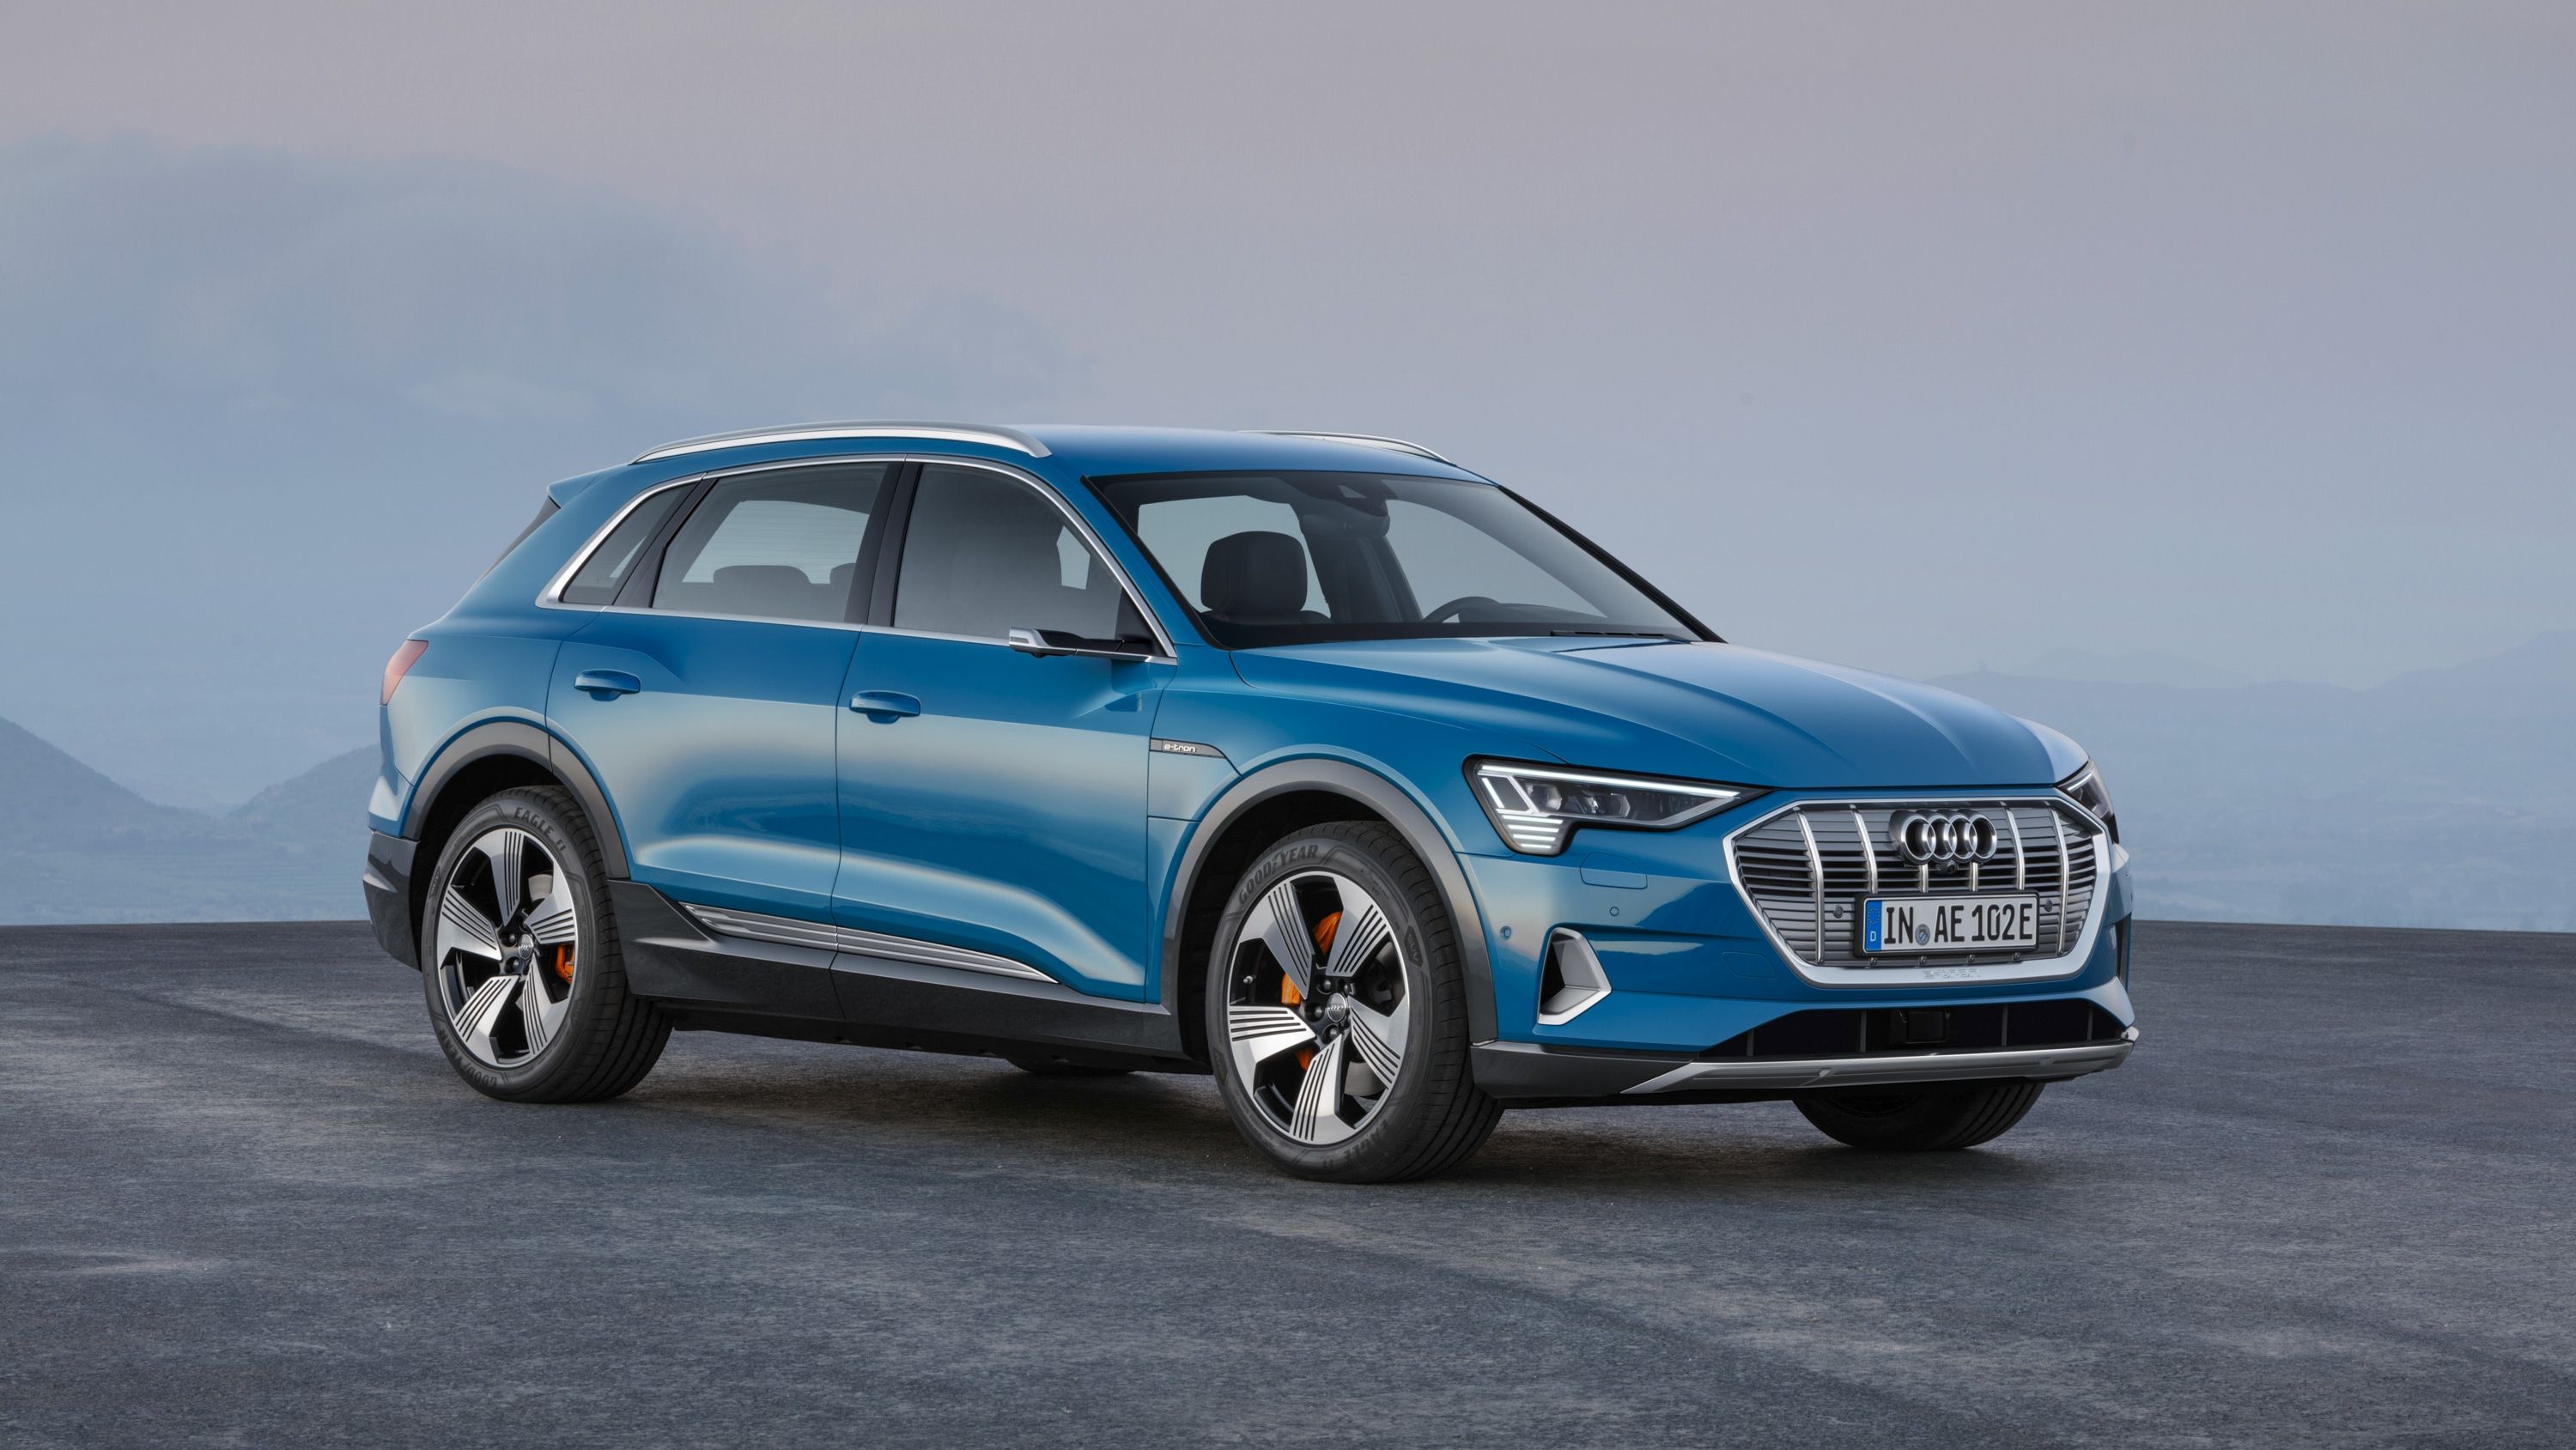 2019 15 Incredible Facts You Have To Know About The New 2019 Audi E-Tron Electric SUV